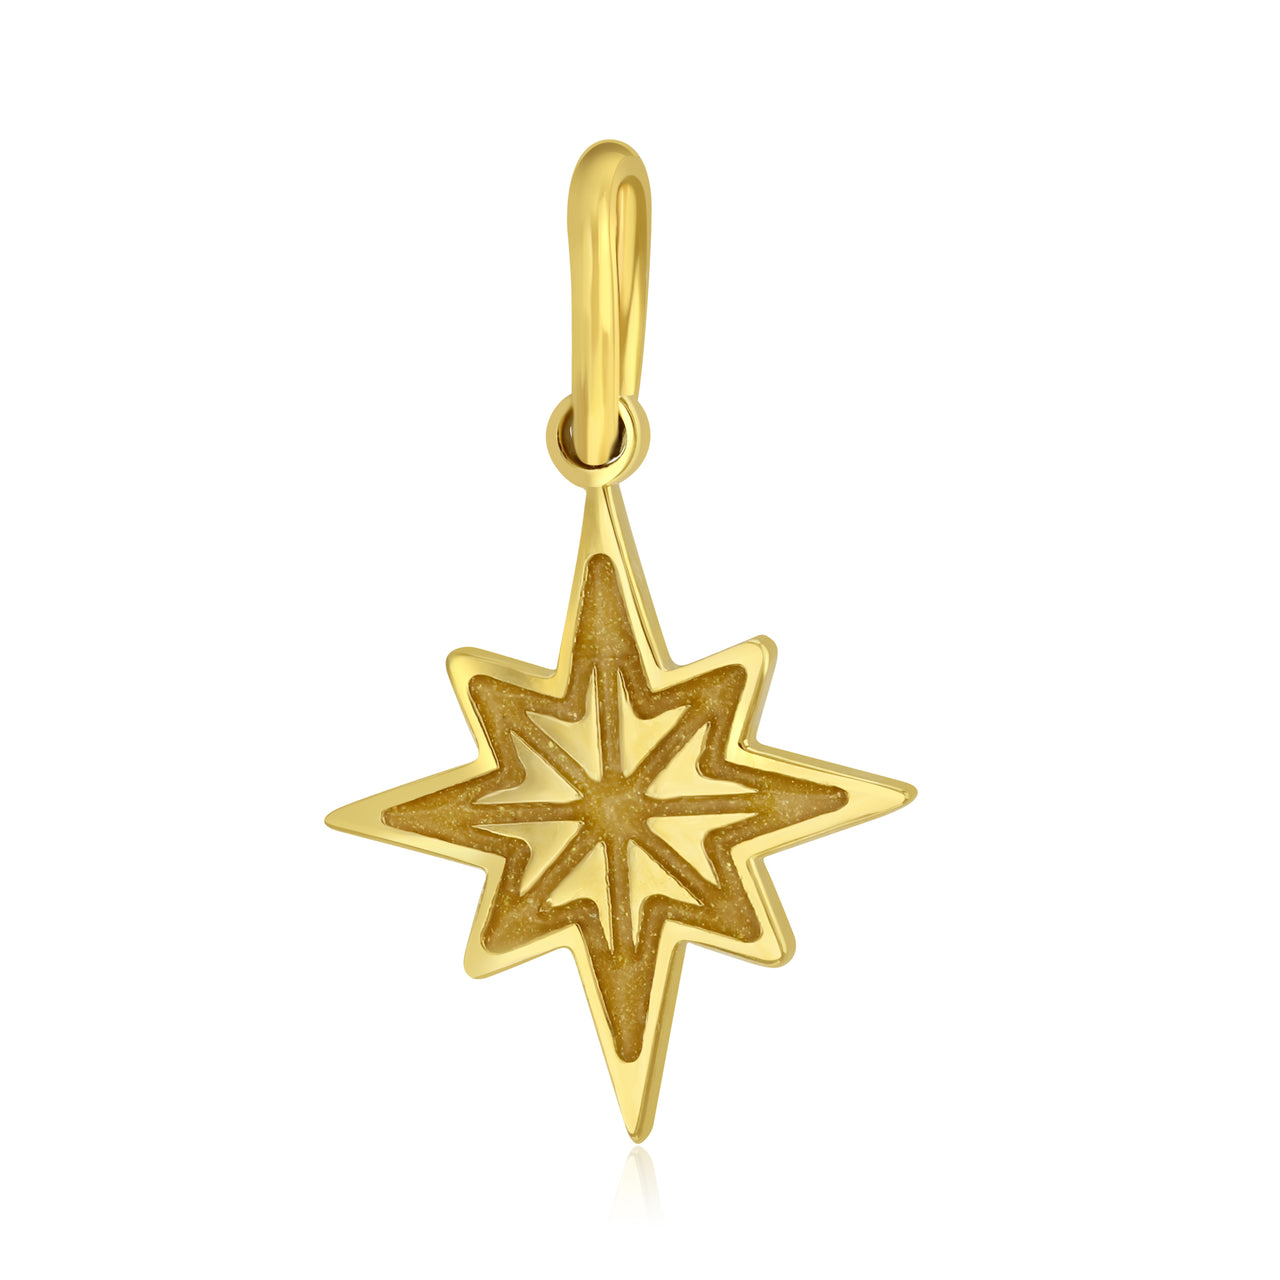 Compass charm with gold sparkly enamel